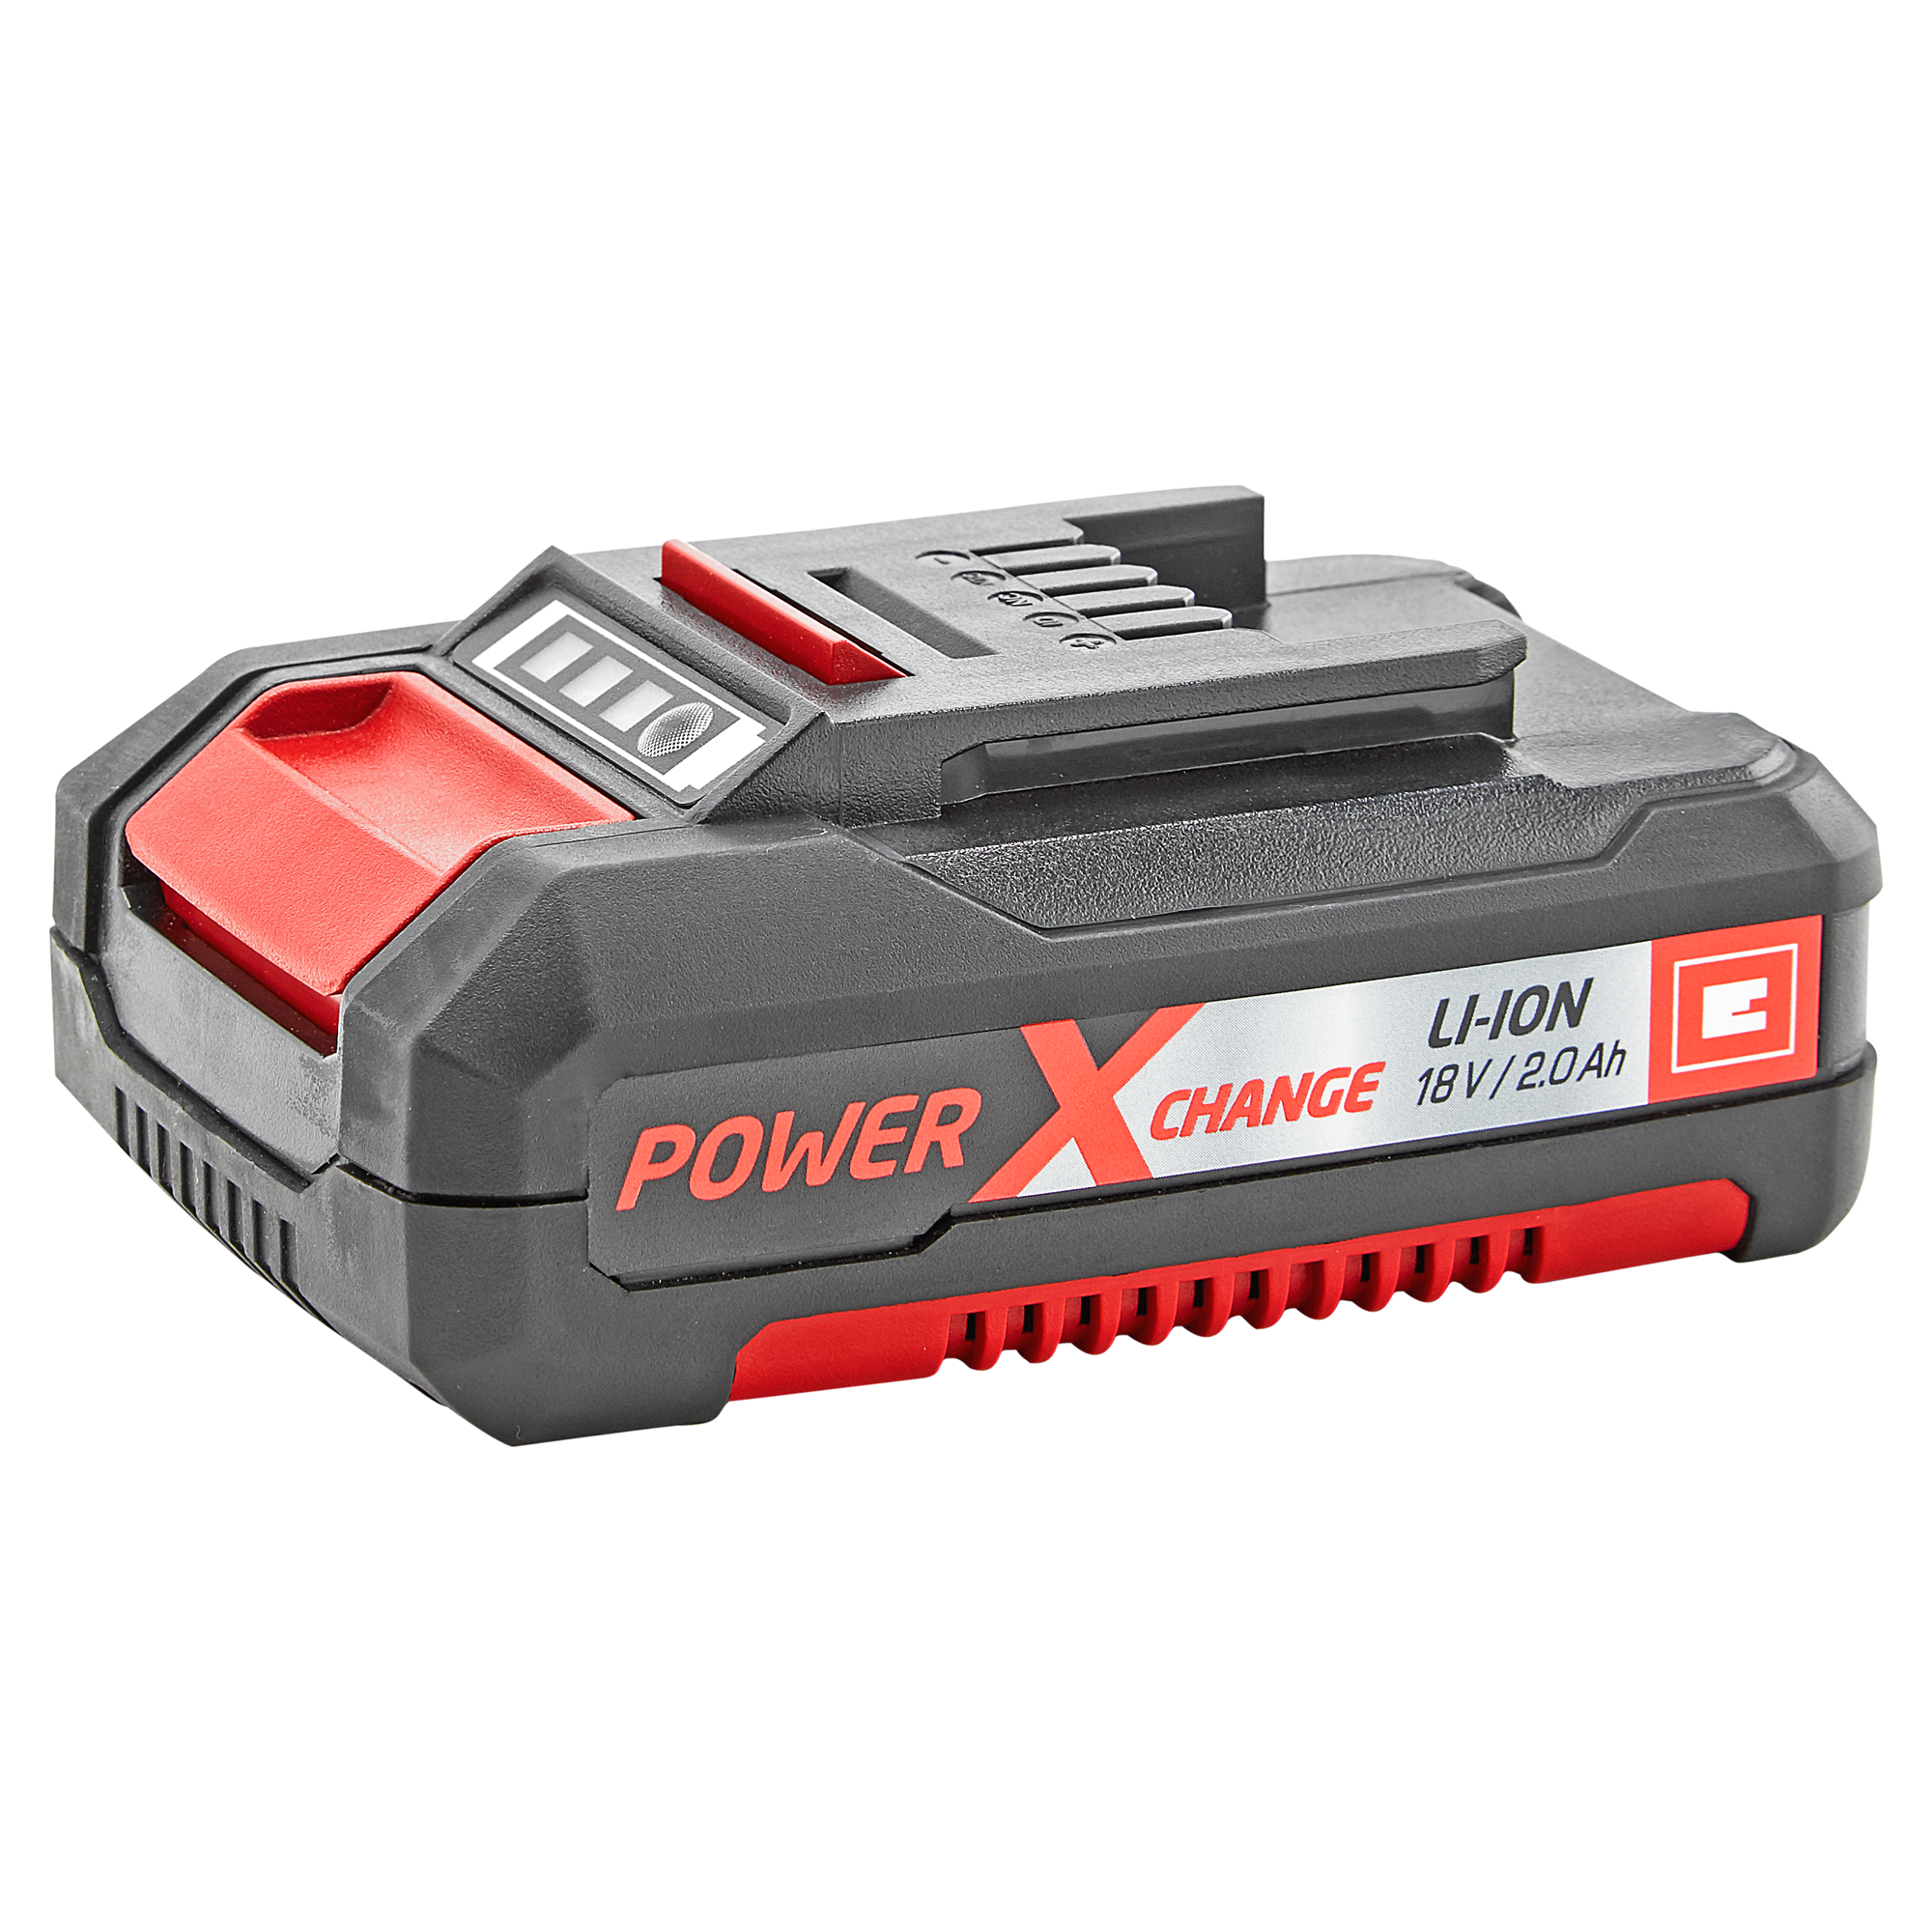 Einhell Akku "Power X-Change" 18 V 2,0 Ah + product picture